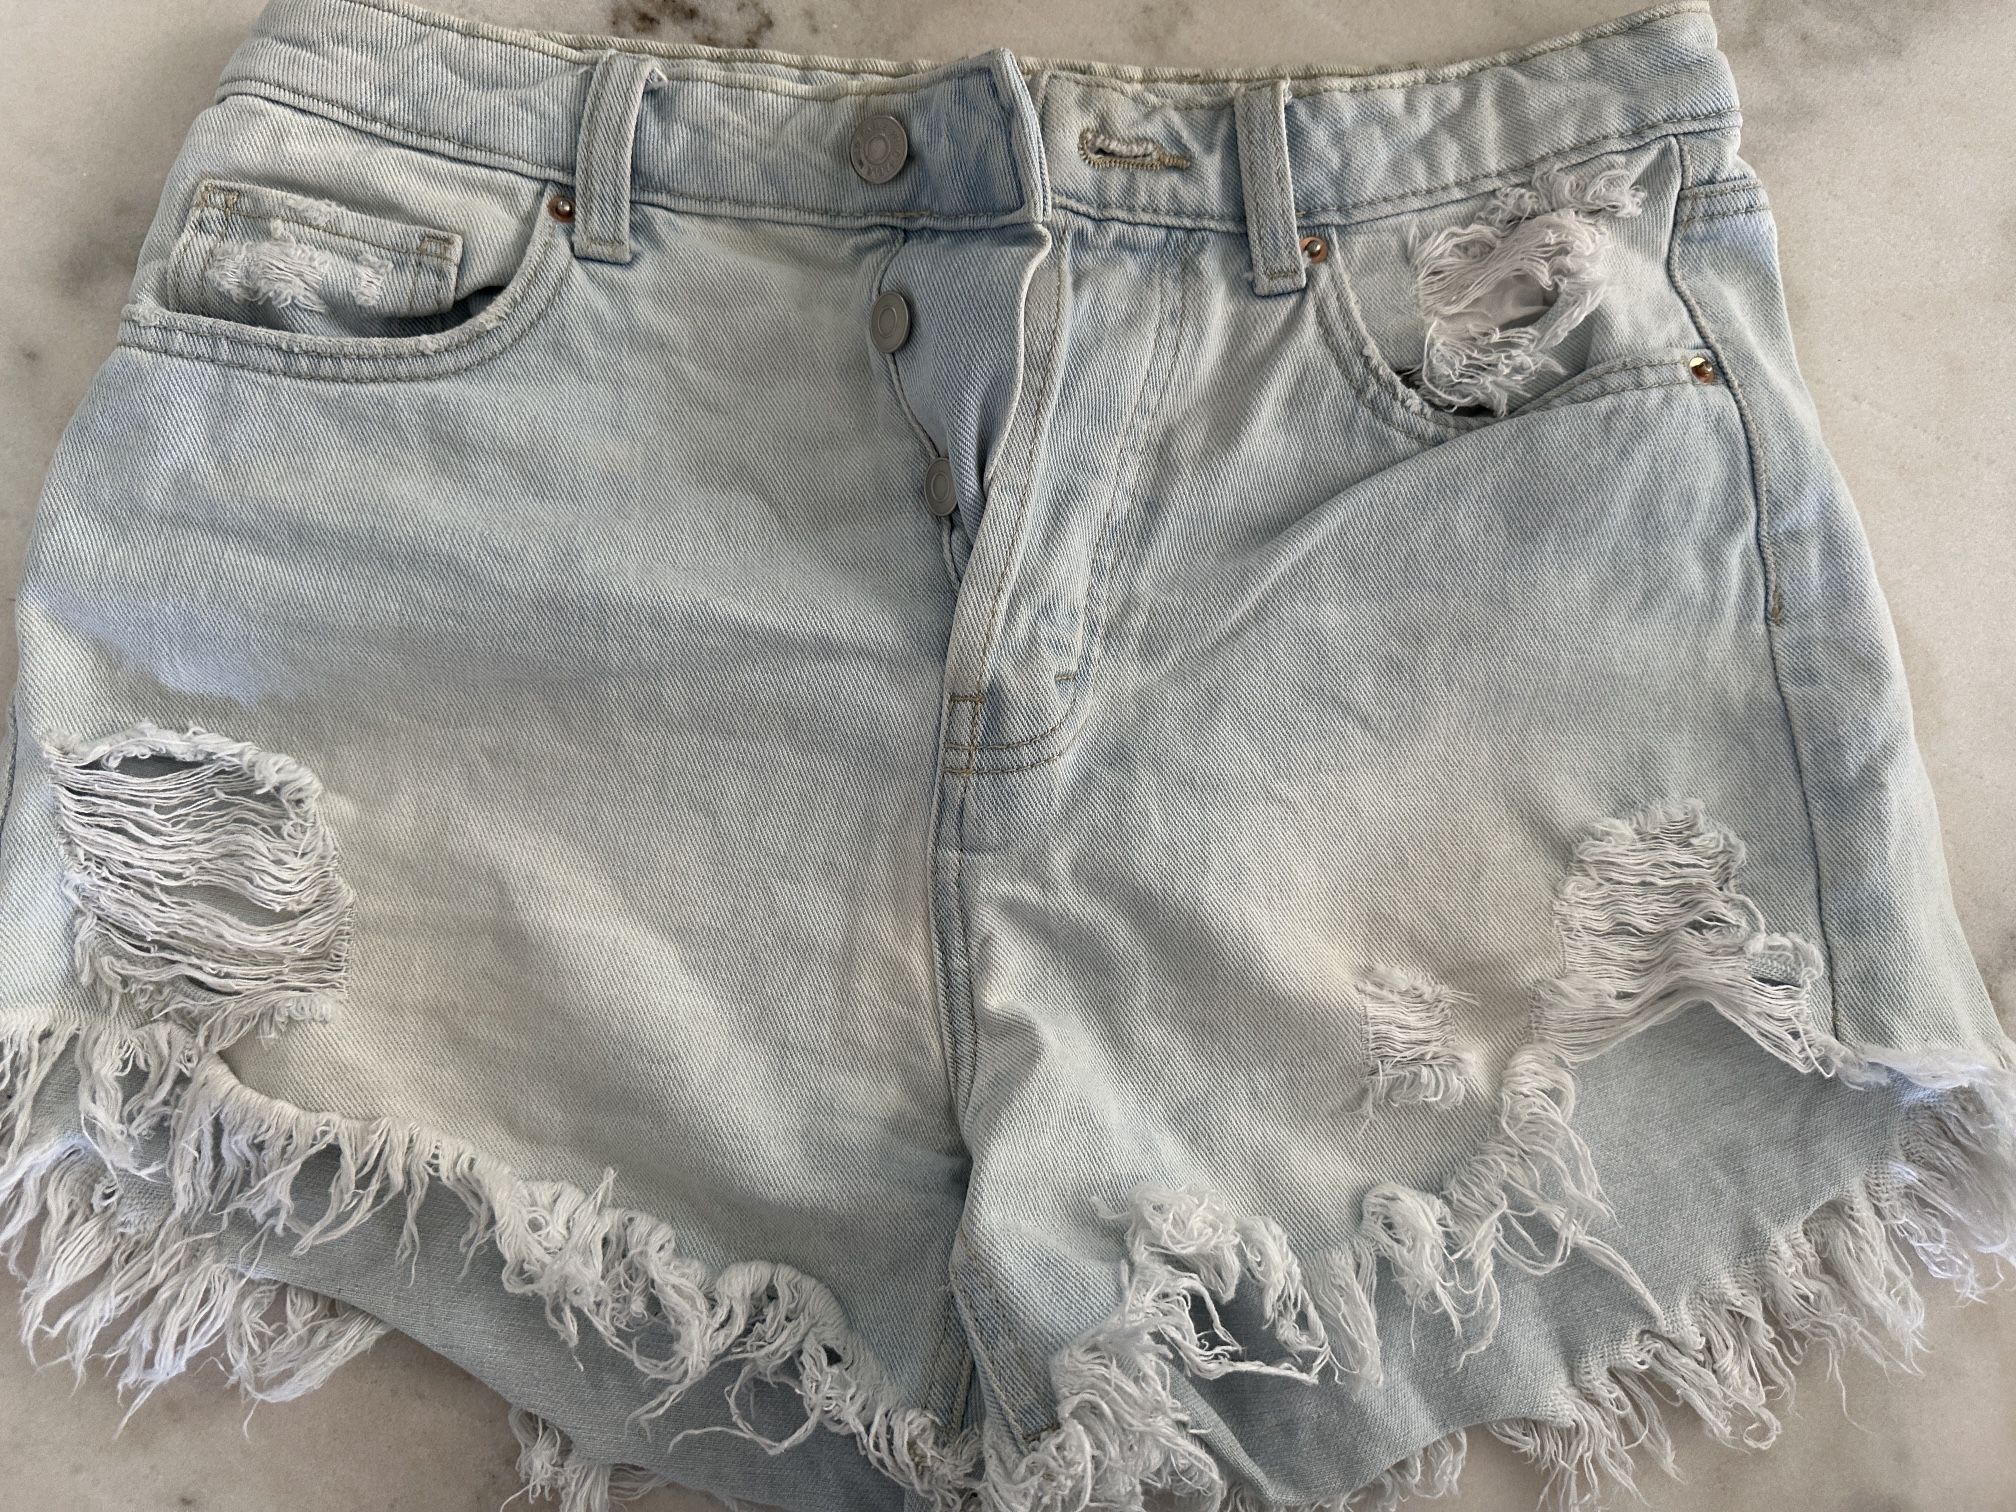 Women’s wild fable shorts, size 4